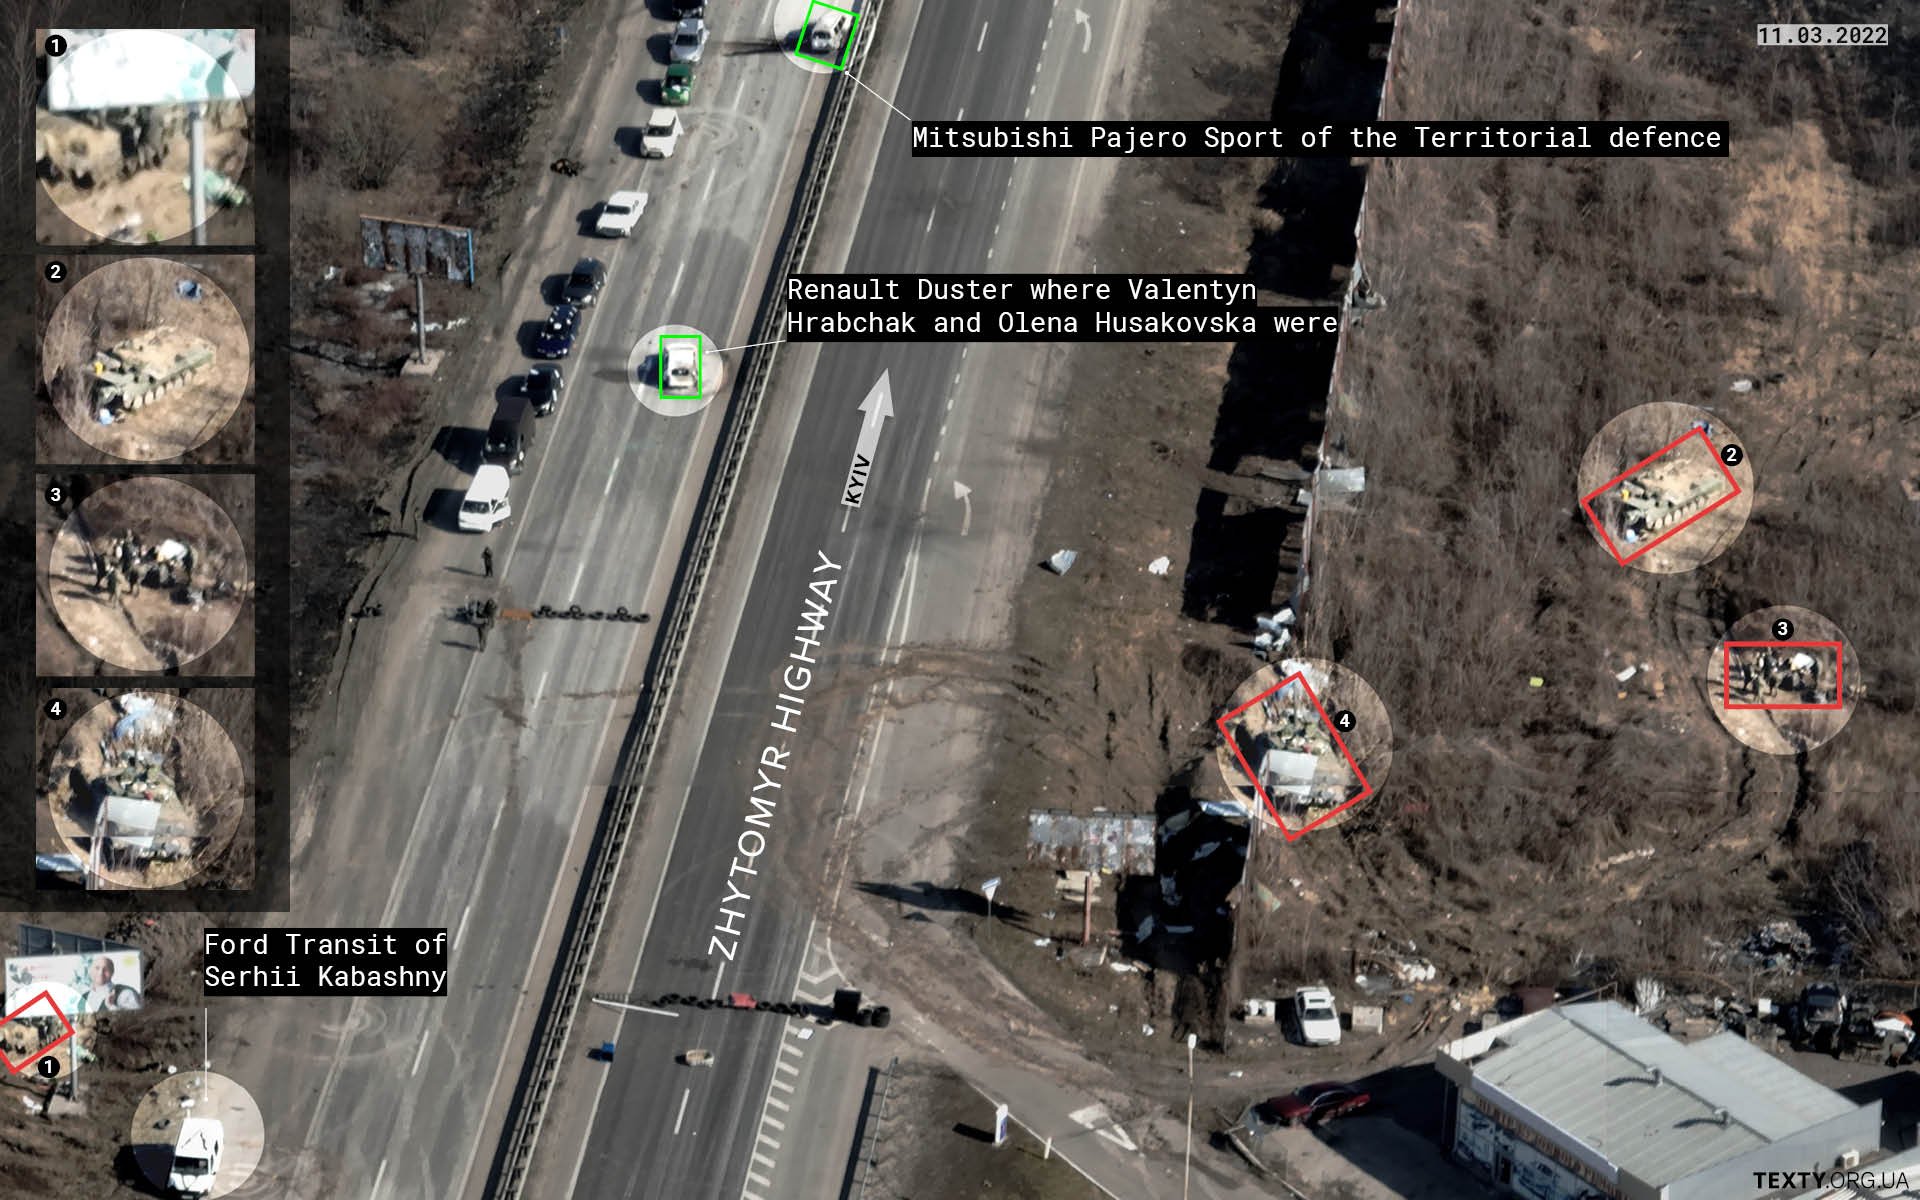 A convoy of civilian vehicles near Russian positions on 11 March. The footage also shows the Ford Transit of Serhii Kabashny, which the Russians used to move around. It is clear that they marked it with the letter V